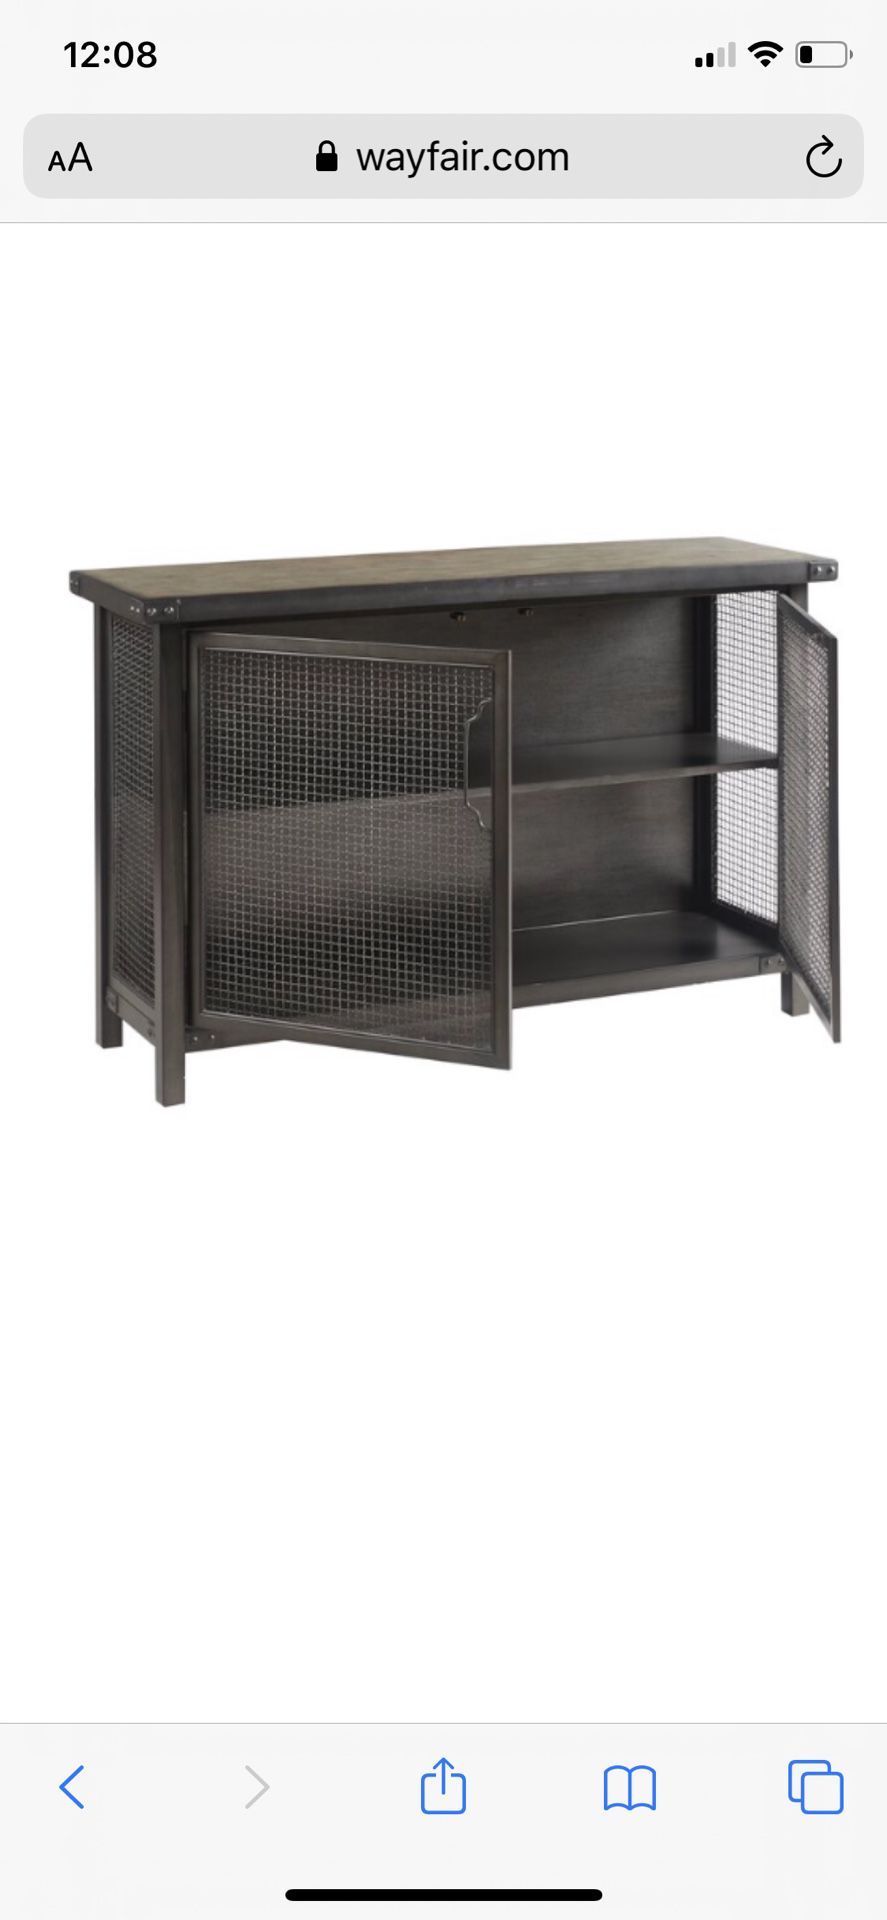 Wayfair Casolino wide sideboard console hutch buffet accent side by Trent Austin Design 50” farmhouse modern cabinet table Cb2 crate restoration west